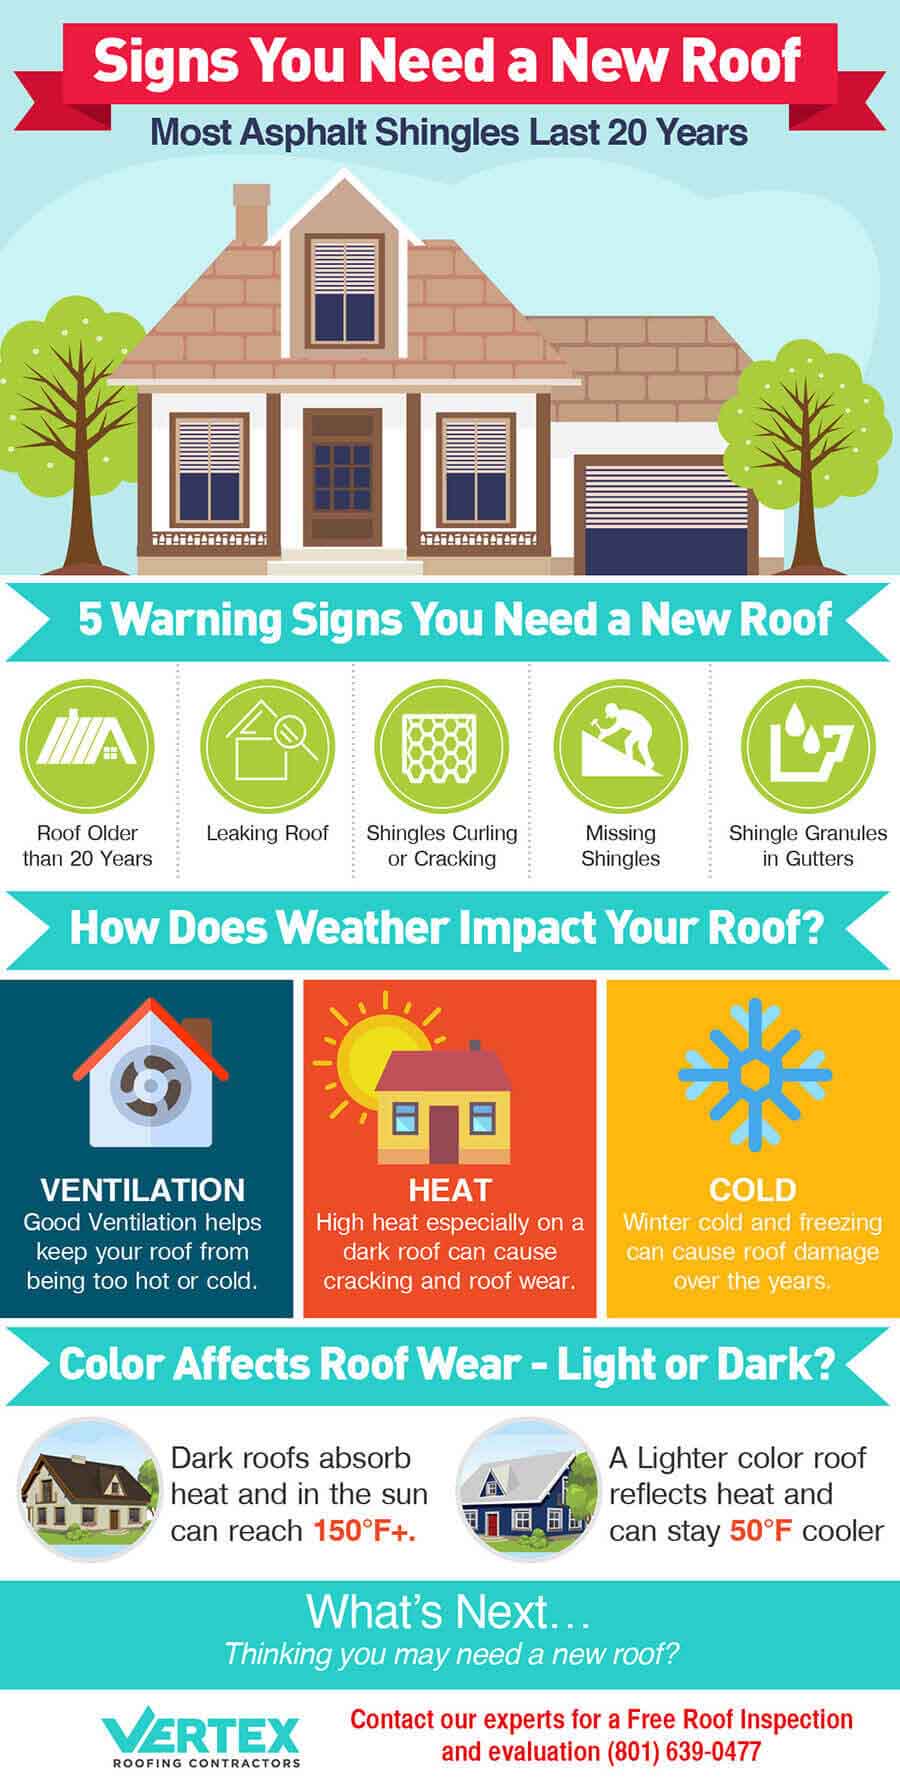 Signs you need a new roof infographic - Vertex Roofing Contractors